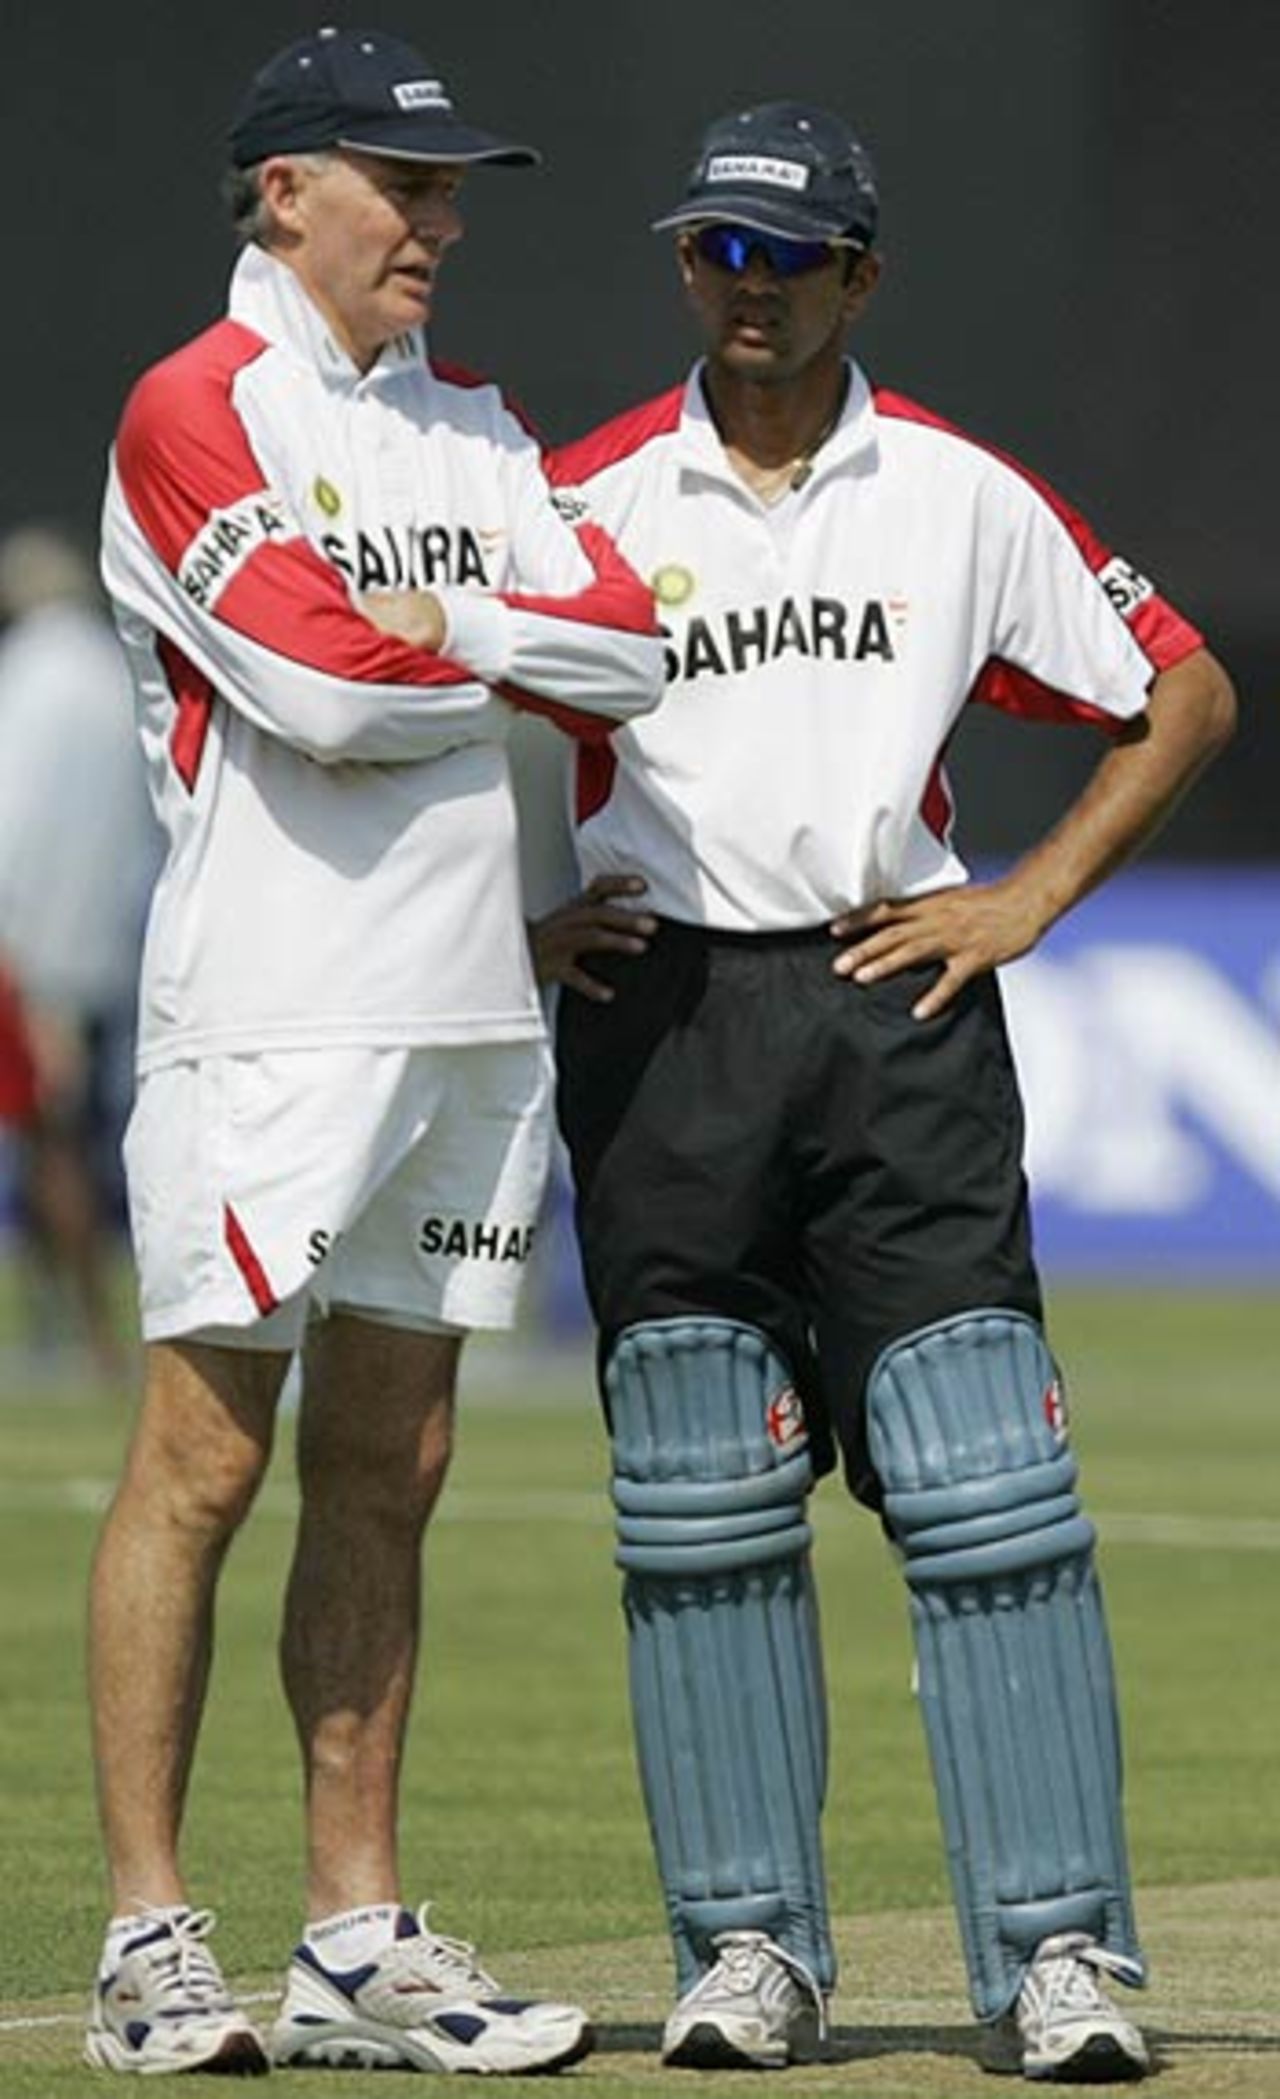 Greg Chappell and Rahul Dravid during a practice session on the eve of the 6th ODI against Sri Lanka,  Madhavrao Scindia Cricket Ground, Rajkot, November 8, 2005